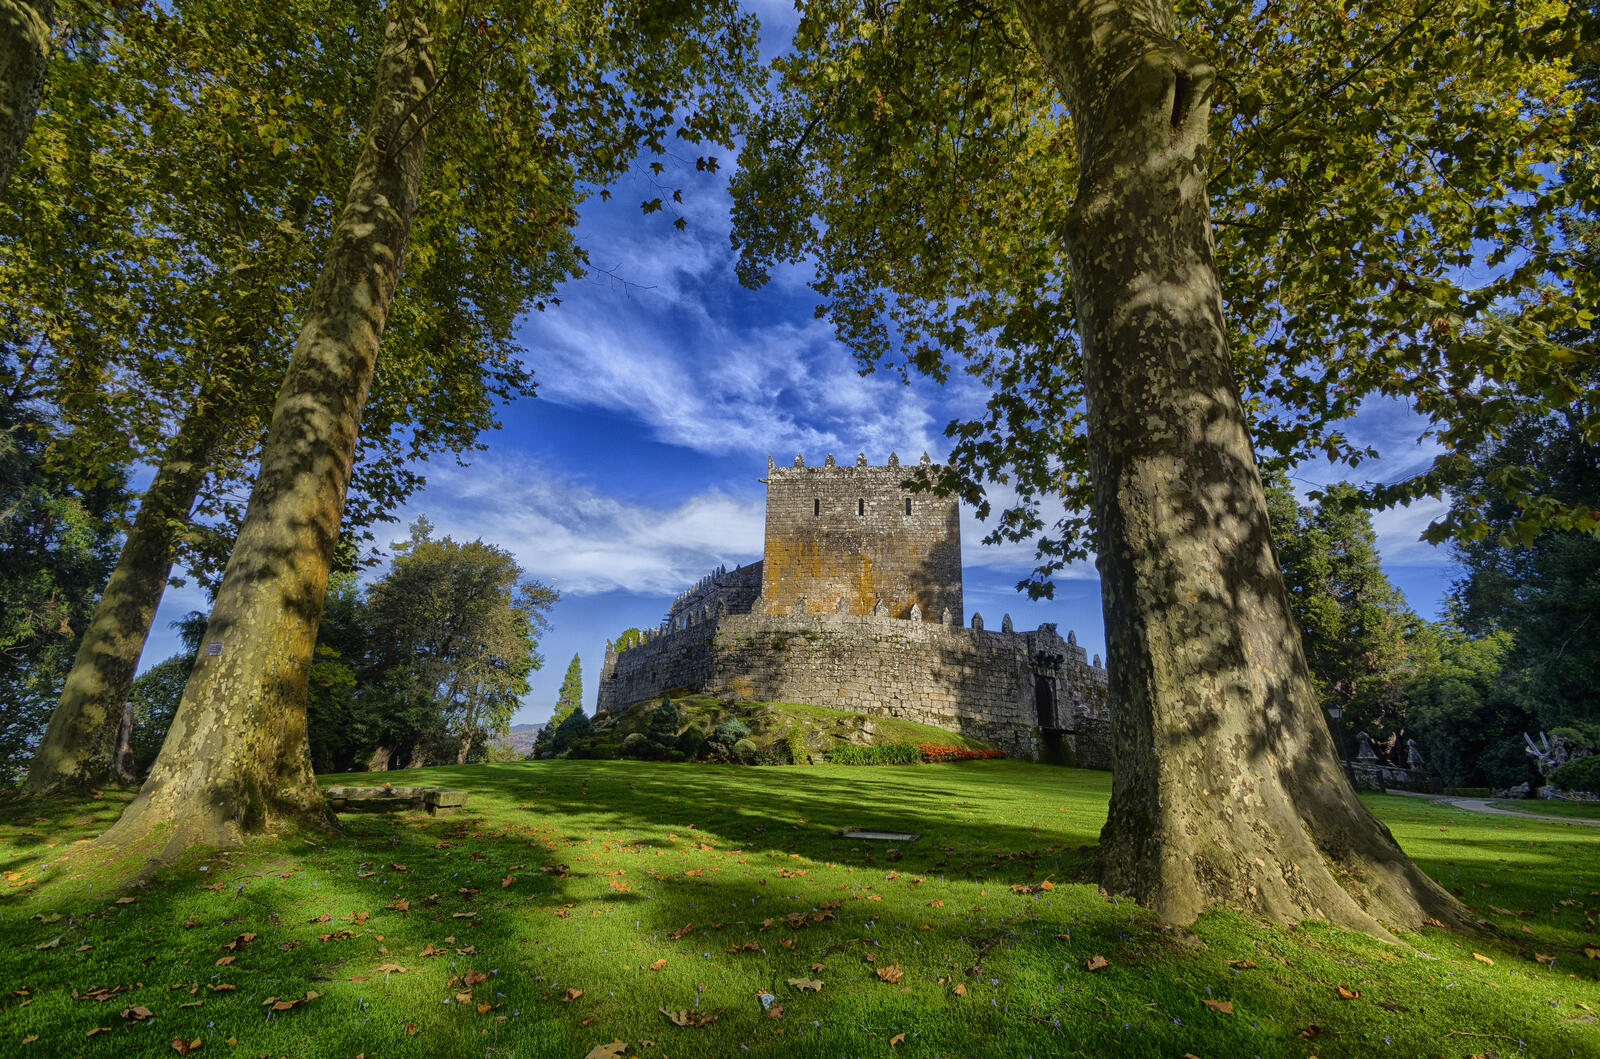 Wallpapers Castle Of Soutomaior Galicia Spain on the desktop